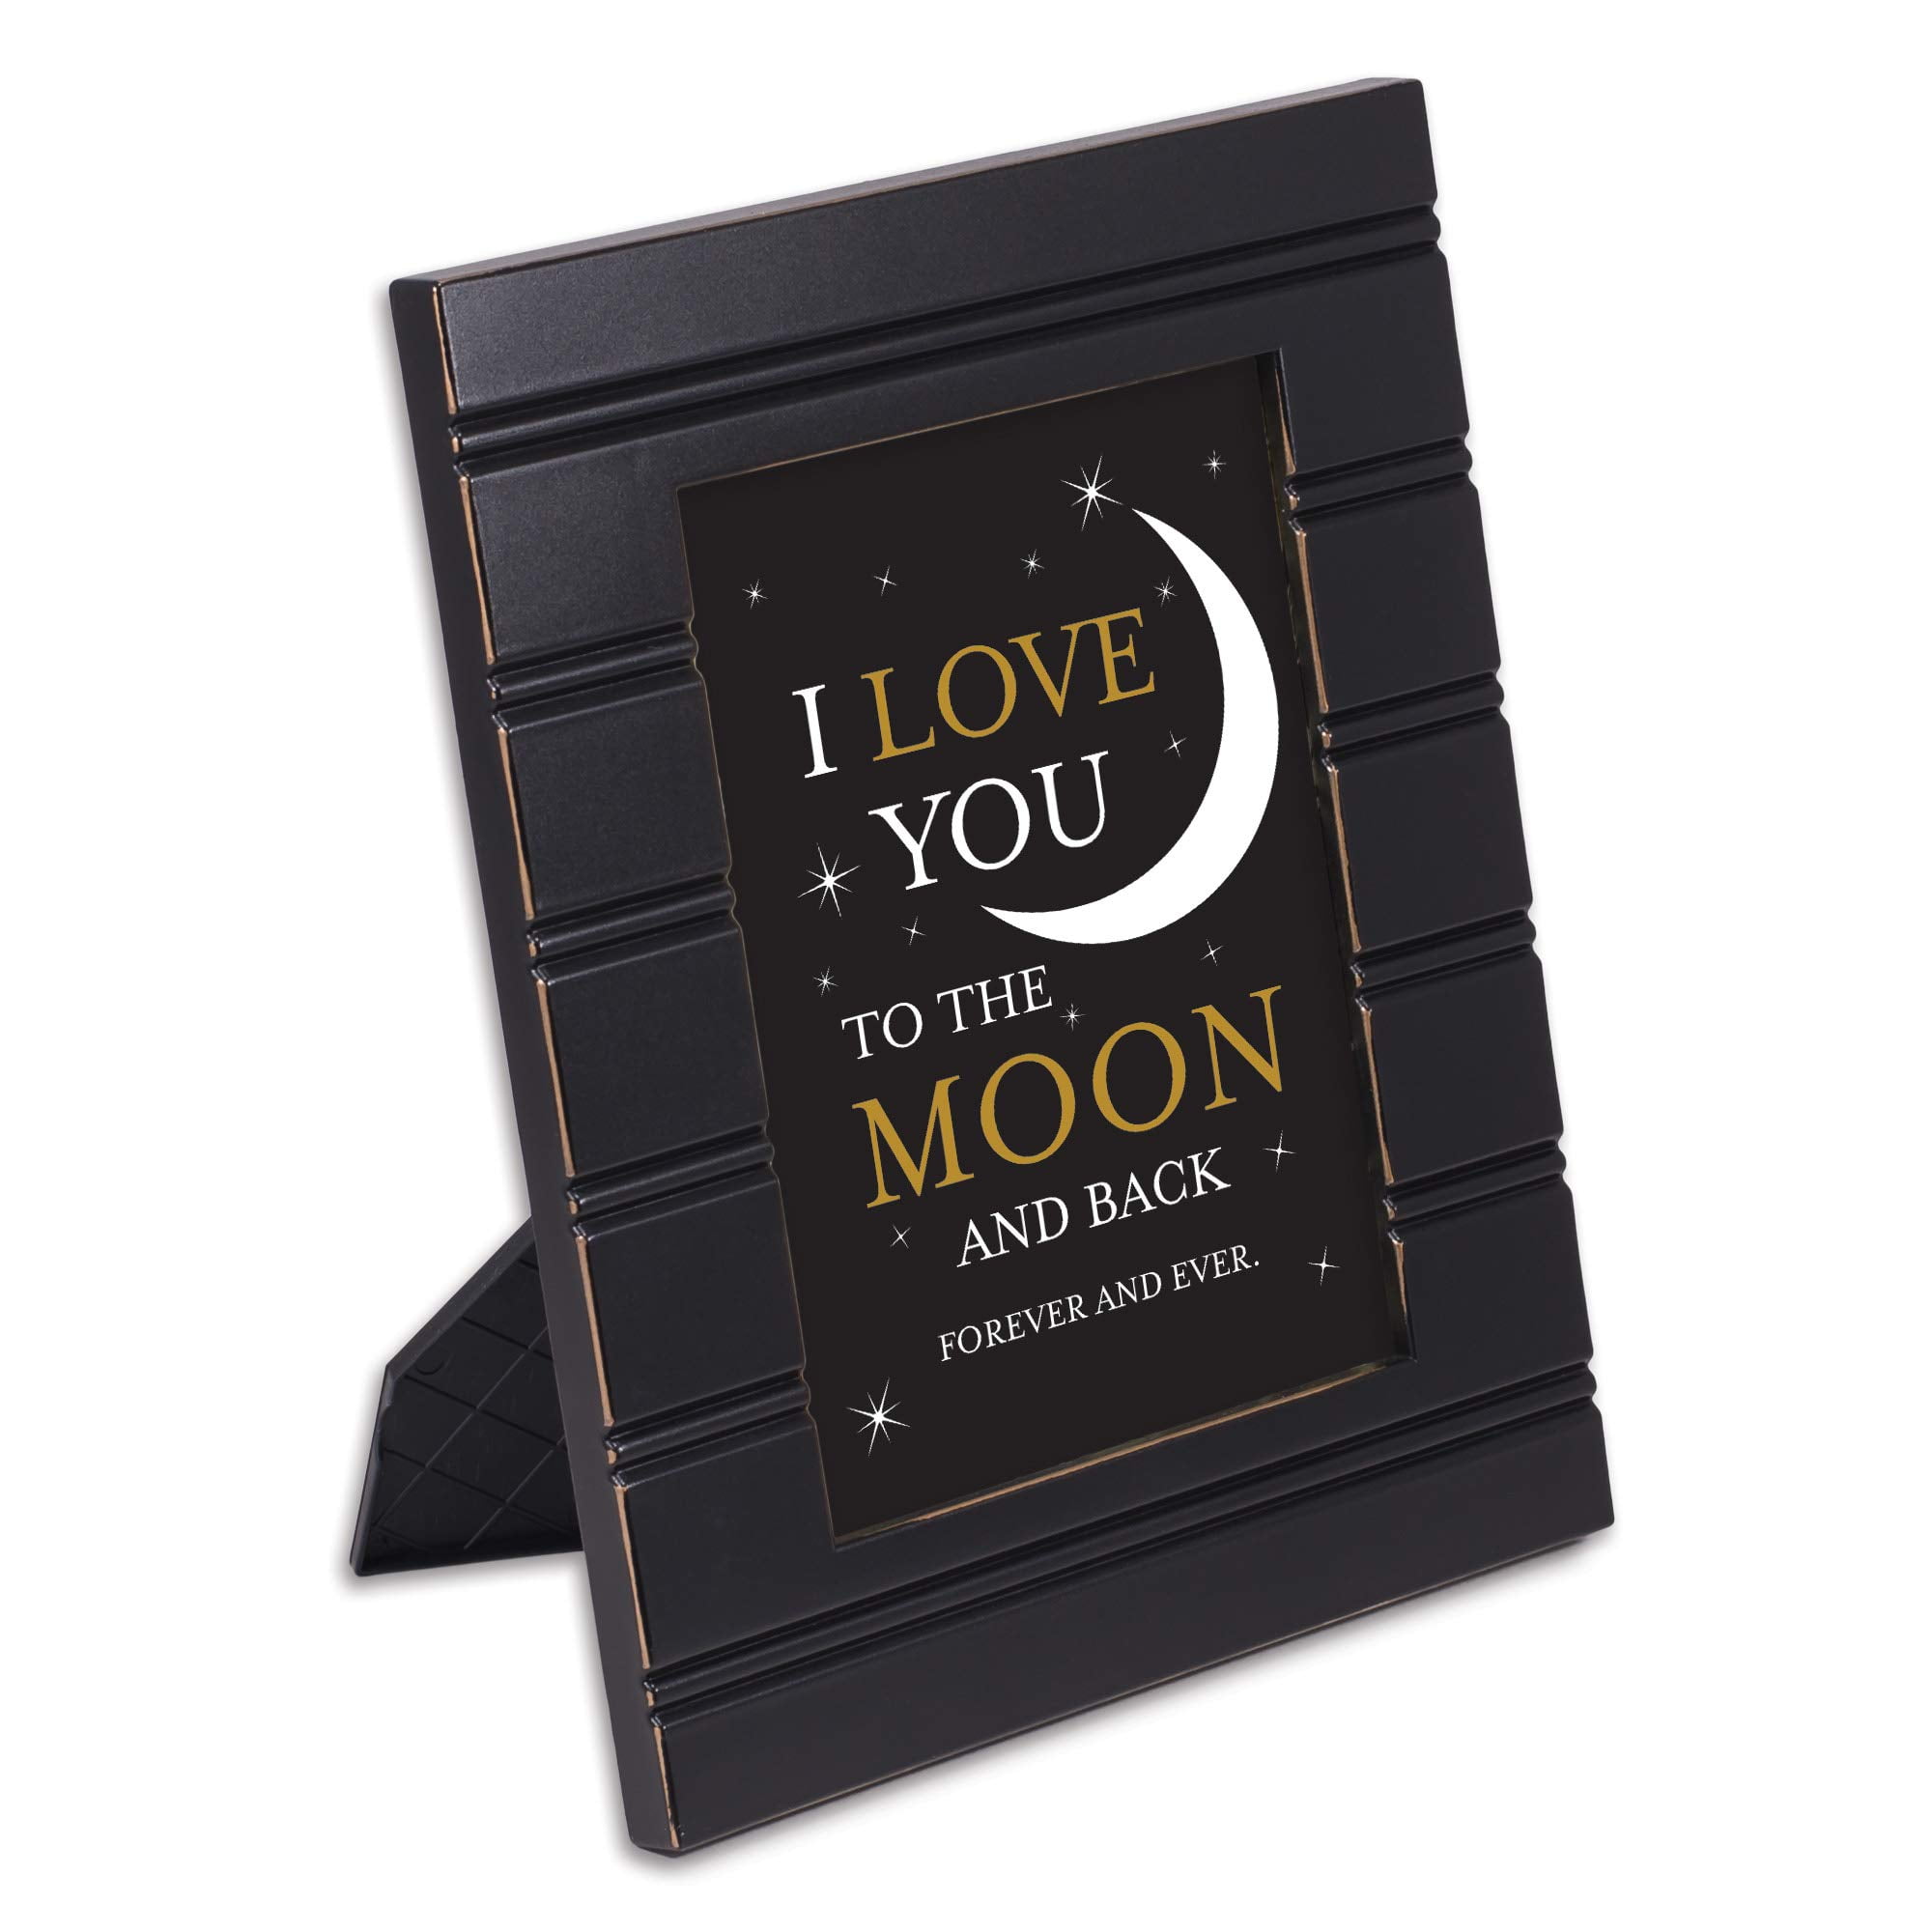 Elanze Designs I Love You To The Moon And Back Black 8 X 10 Beaded Board Picture Frame Plaque Walmart Com Walmart Com